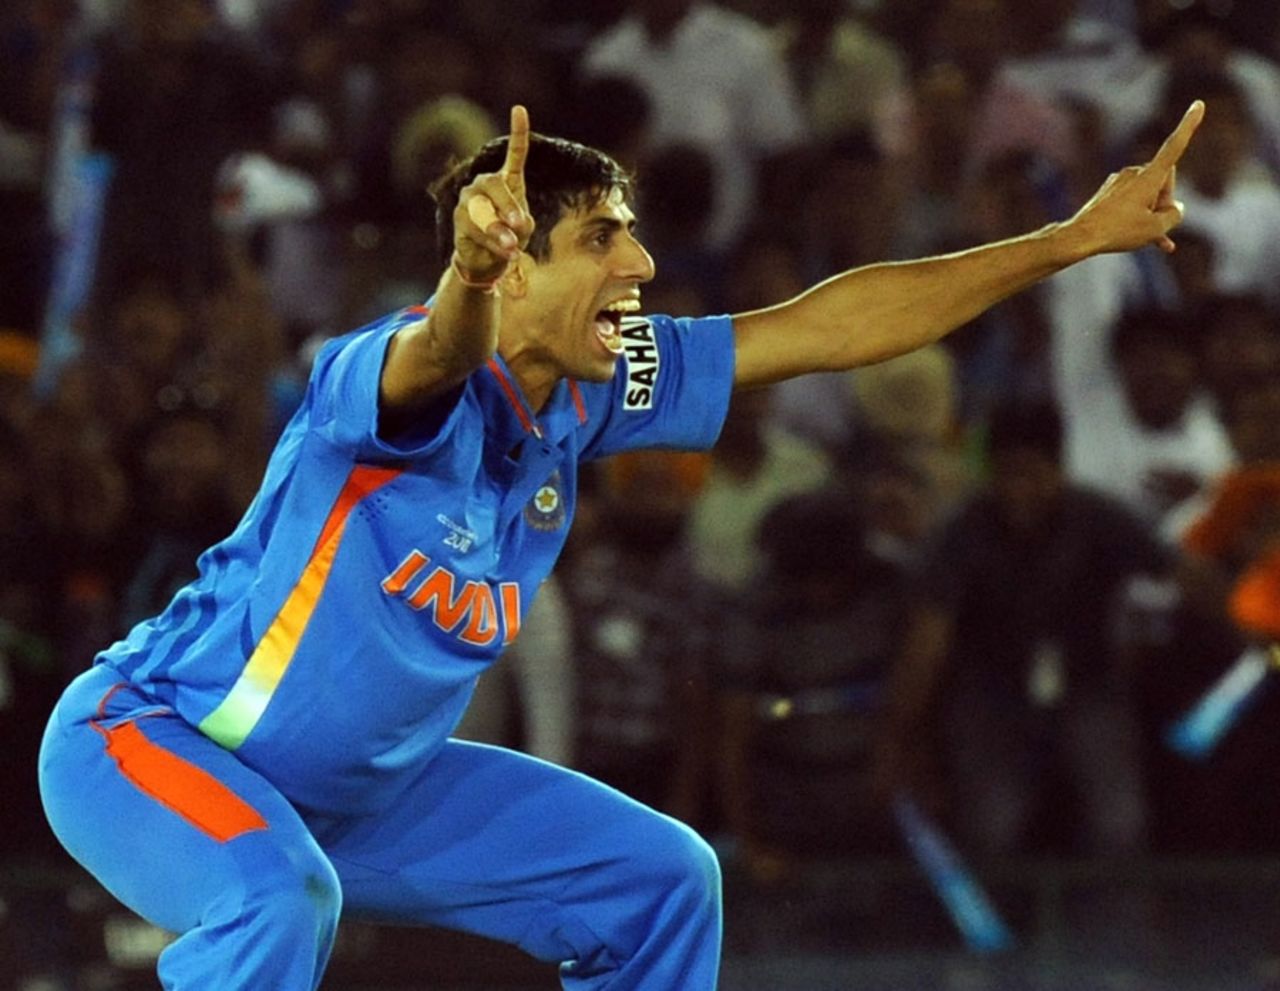 Ashish Nehra appeals successfully for an lbw, India v Pakistan, 2nd semi-final, World Cup 2011, Mohali, March 30, 2011